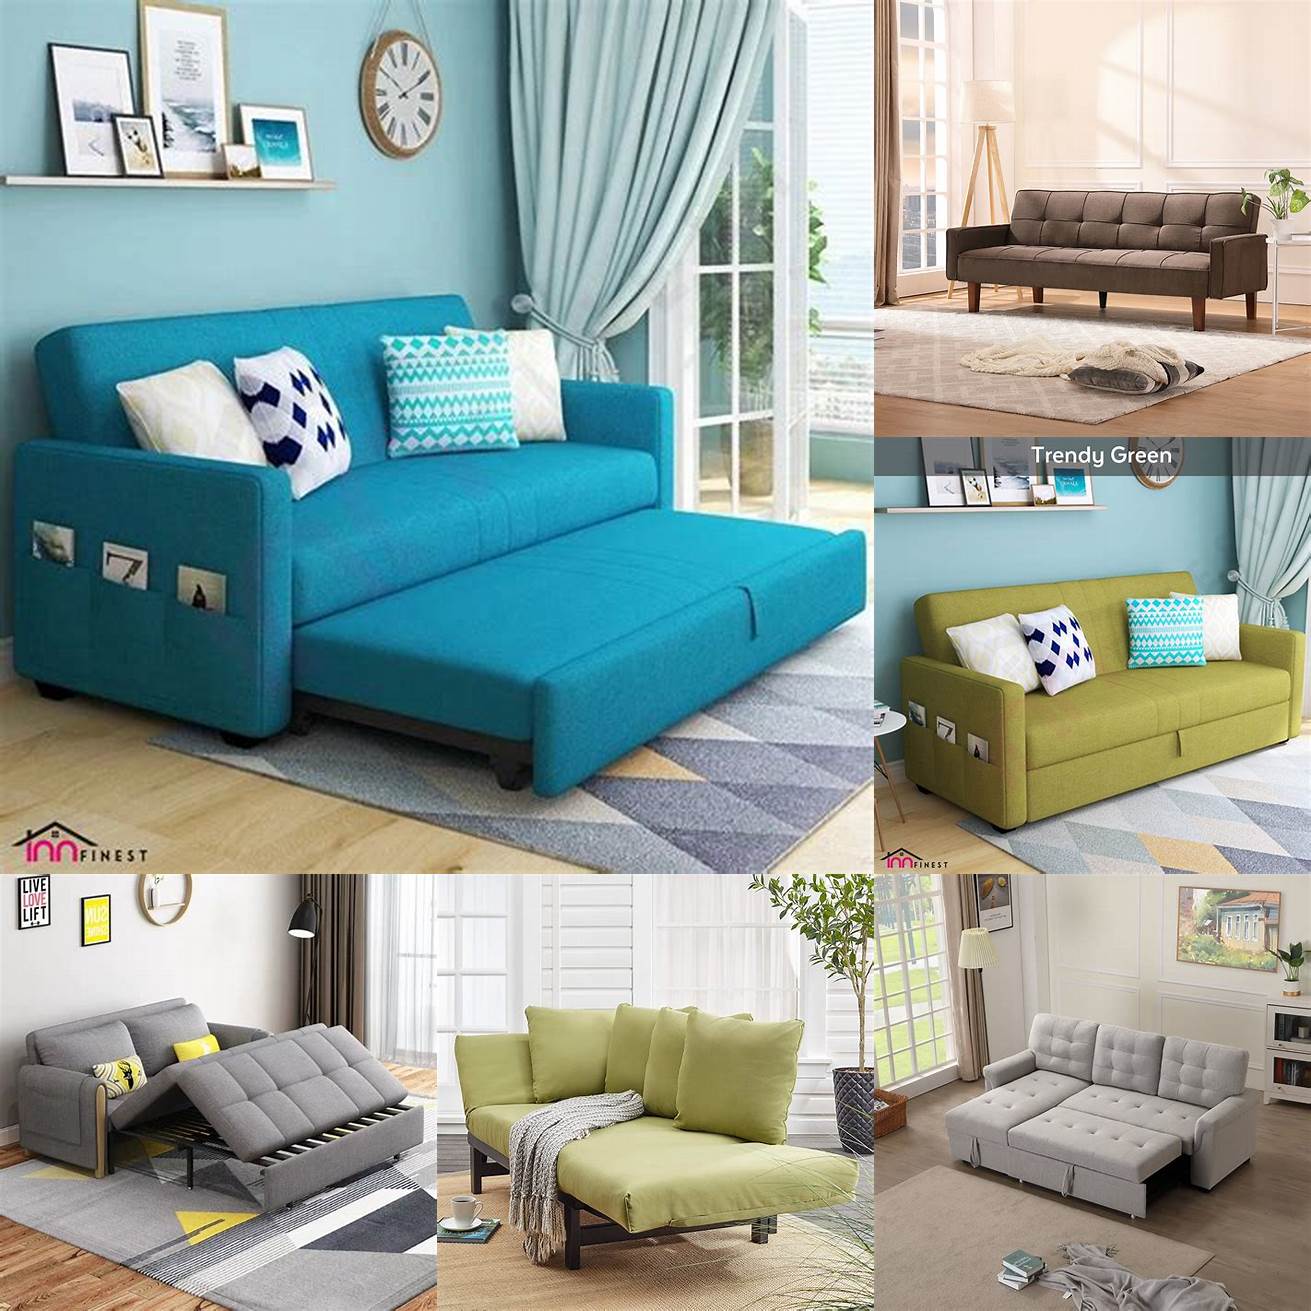 A sofa bed is the perfect example of multipurpose furniture During the day it can serve as a comfortable seating option and at night it can be transformed into a bed for sleeping